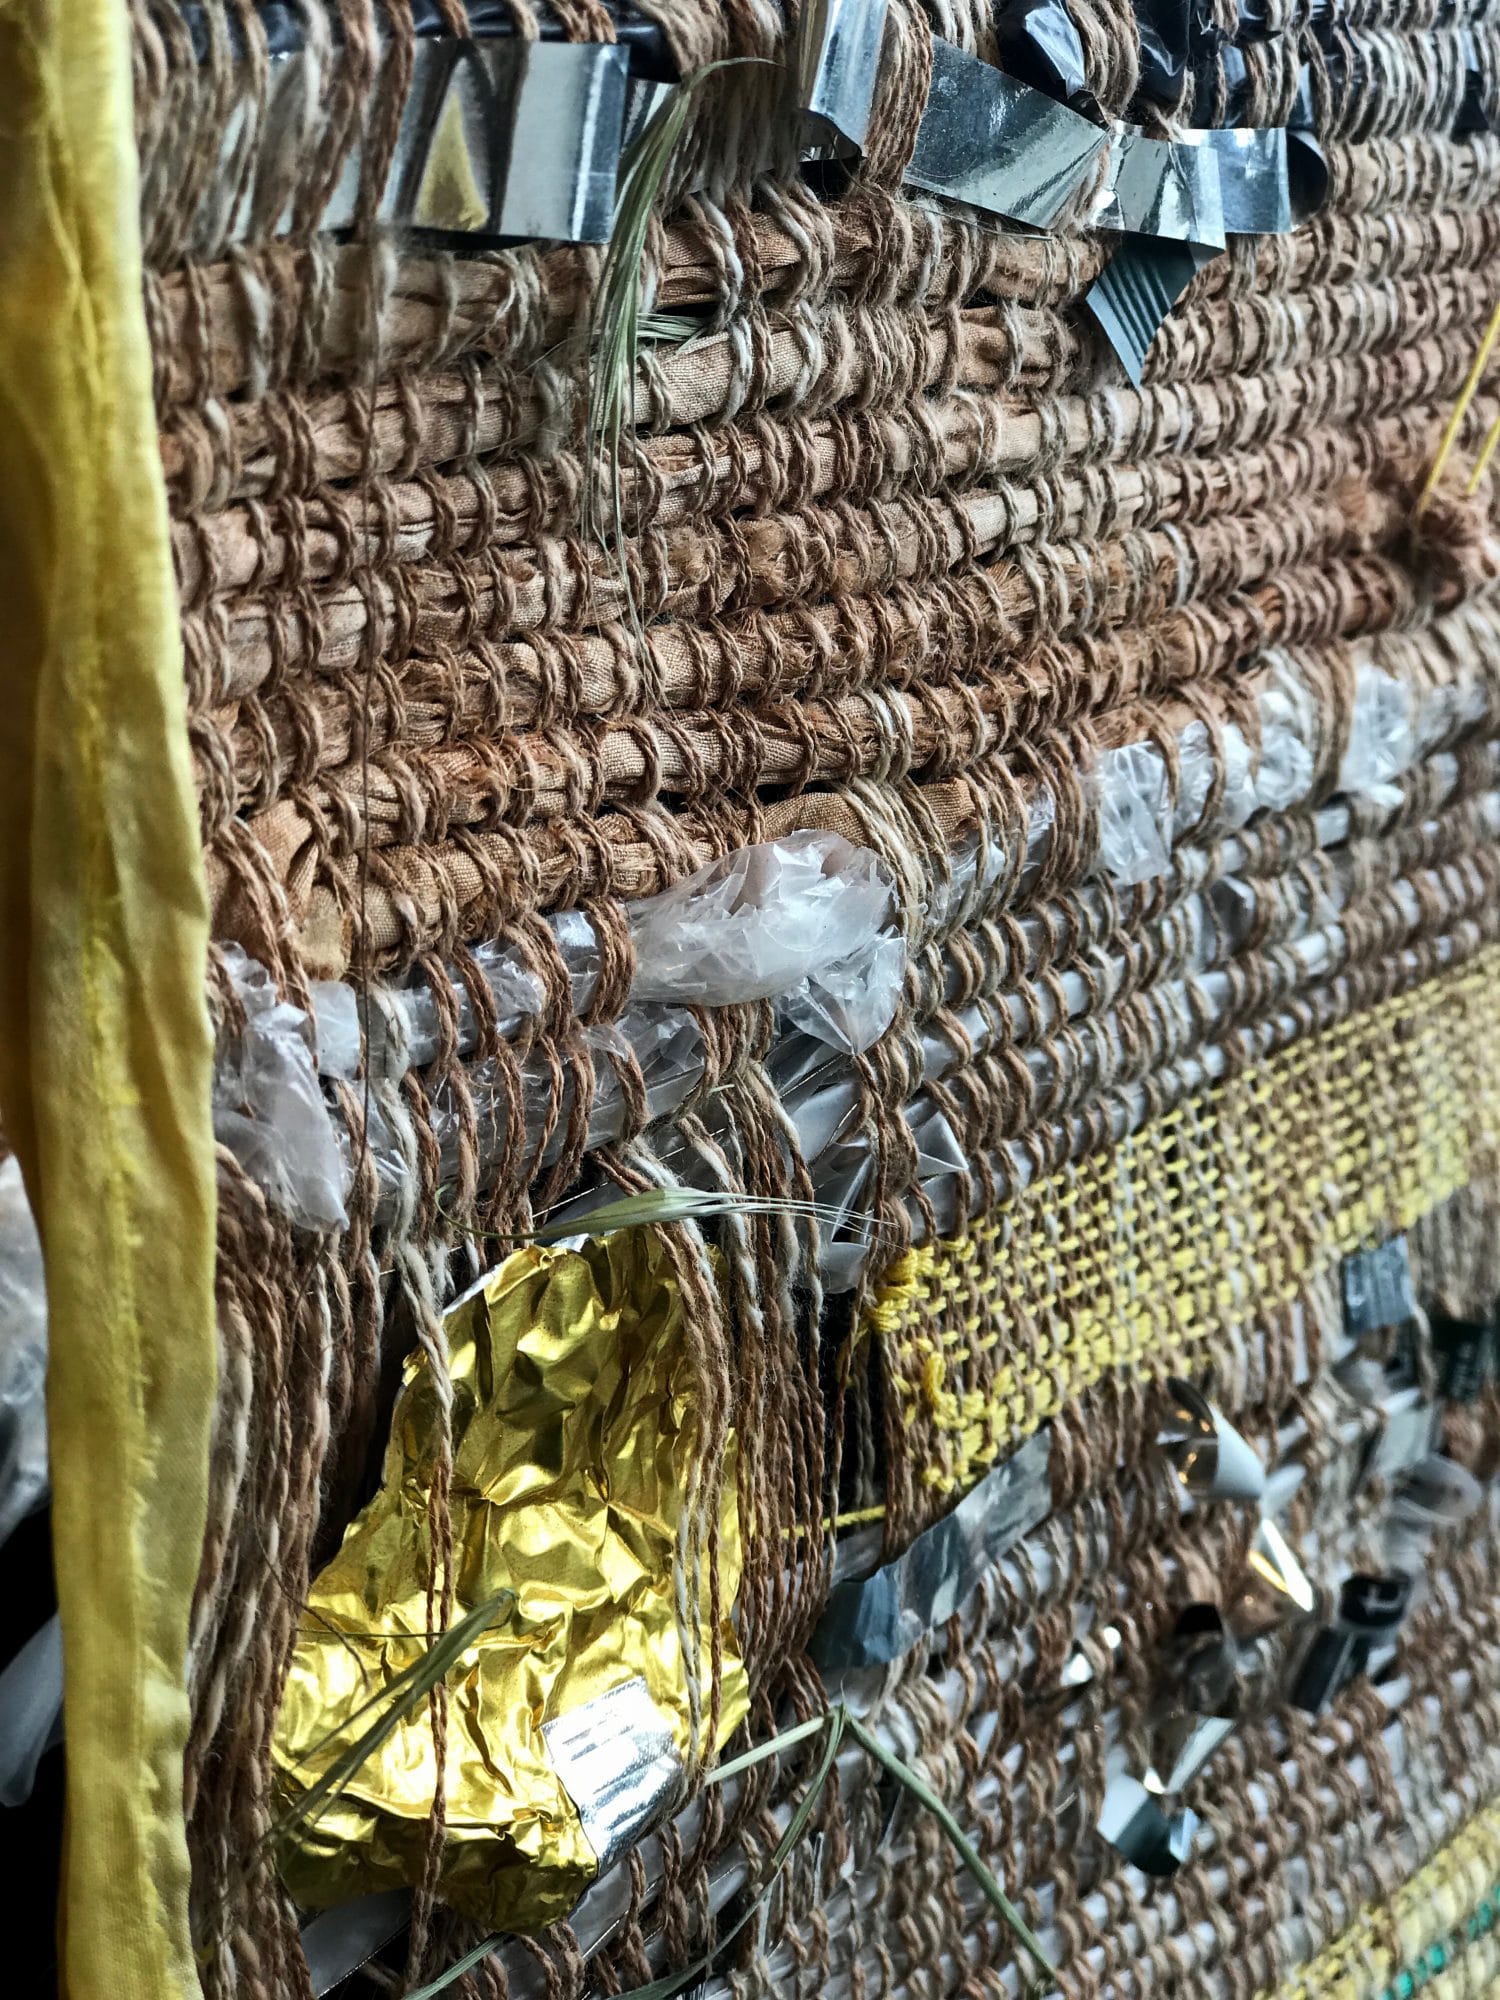 Soil Meet Waste, Maud Barrett, Femke Lemmens, Poplar Union, exhibition, weaving, upcycling, recycling, environment, East London, exhibition opening, e5 roasthouse, e5 bakehouse, free exhibition, things to do, art, culture, community, art centre